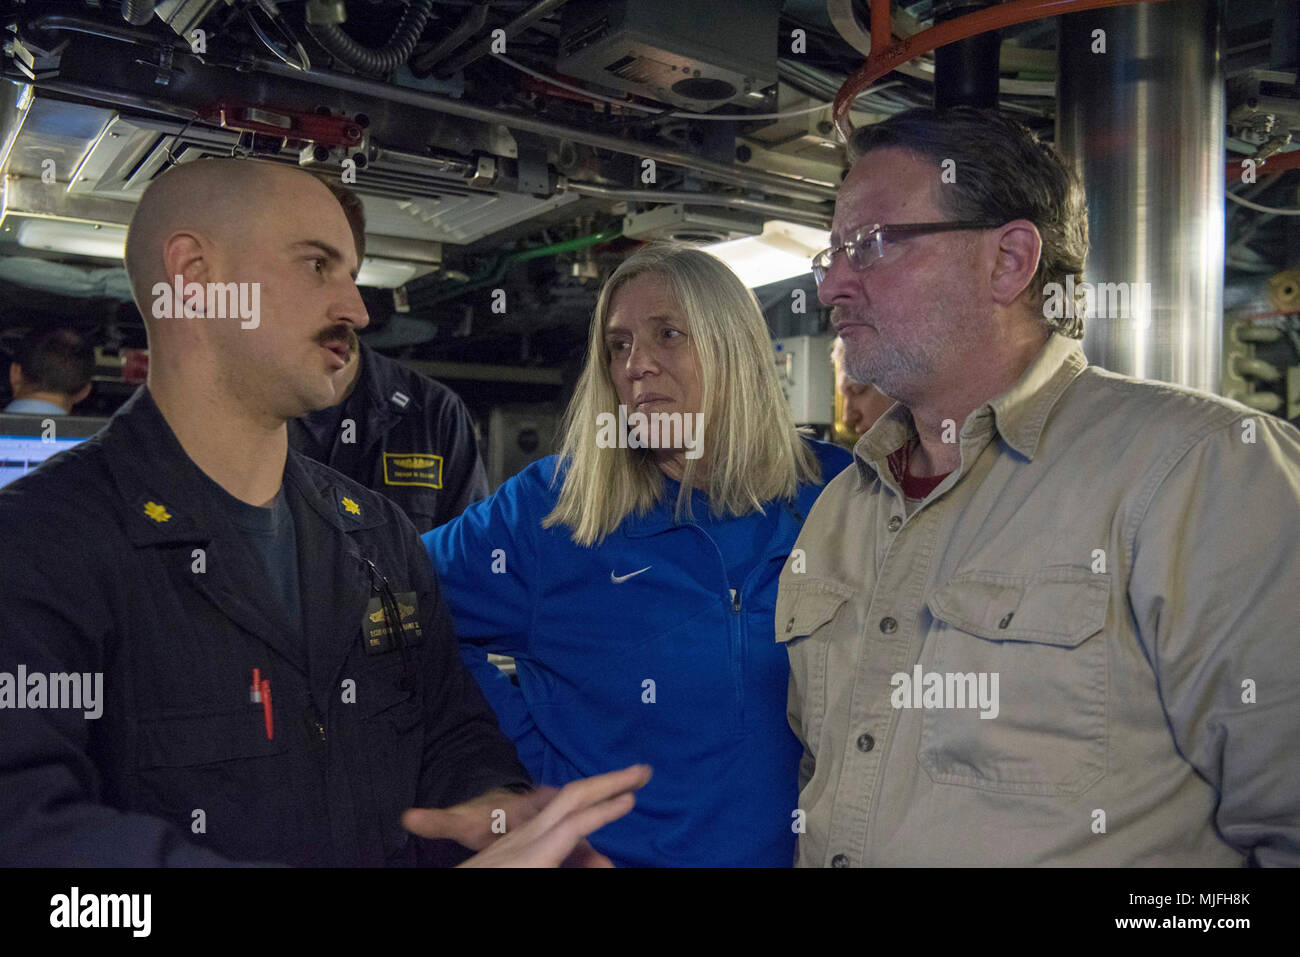 BEAUFORT SEA, Arctic Ocean (March 18, 2018) – Susan Gordon, principal deputy, Director of National Intelligence, Senator Gary Peters talks with a Sailor assigned to the Seawolf-class fast-attack submarine USS Connecticut (SSN 22) as it participates in Ice Exercise (ICEX) 2018, March 18. ICEX 2018 is a five-week exercise that allows the Navy to assess its operational readiness in the Arctic, increase experience in the region, advance understanding of the Arctic environment, and continue to develop relationships with other services, allies and partner organizations. (U.S. Navy Stock Photo